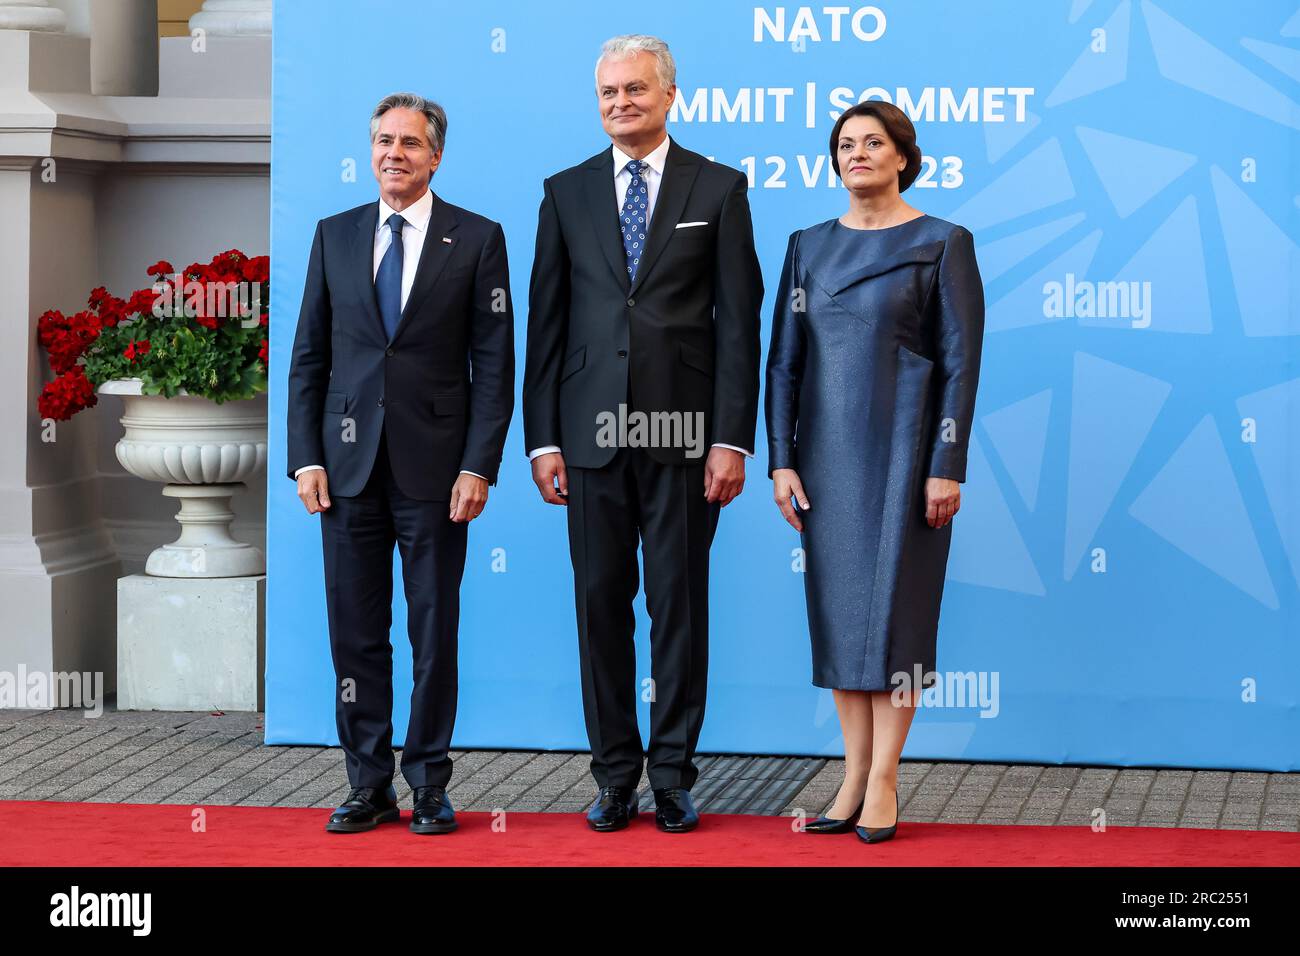 Vilnius, Lithuania. 11th July, 2023. President of Lithuania, Gitanas Naus?da and his wife Diana Naus?dien? welcome United States Secretary of State, Antony Blinken as he arrives for a social dinner during the high level NATO summit. The President of Lithuania hosts the dinner for world leaders at the Presidential Palace. The summit agenda covers Ukraine's bid to join the organisation, the accession process of Sweden, boosting arms stockpiles and reviewing plans. Credit: SOPA Images Limited/Alamy Live News Stock Photo